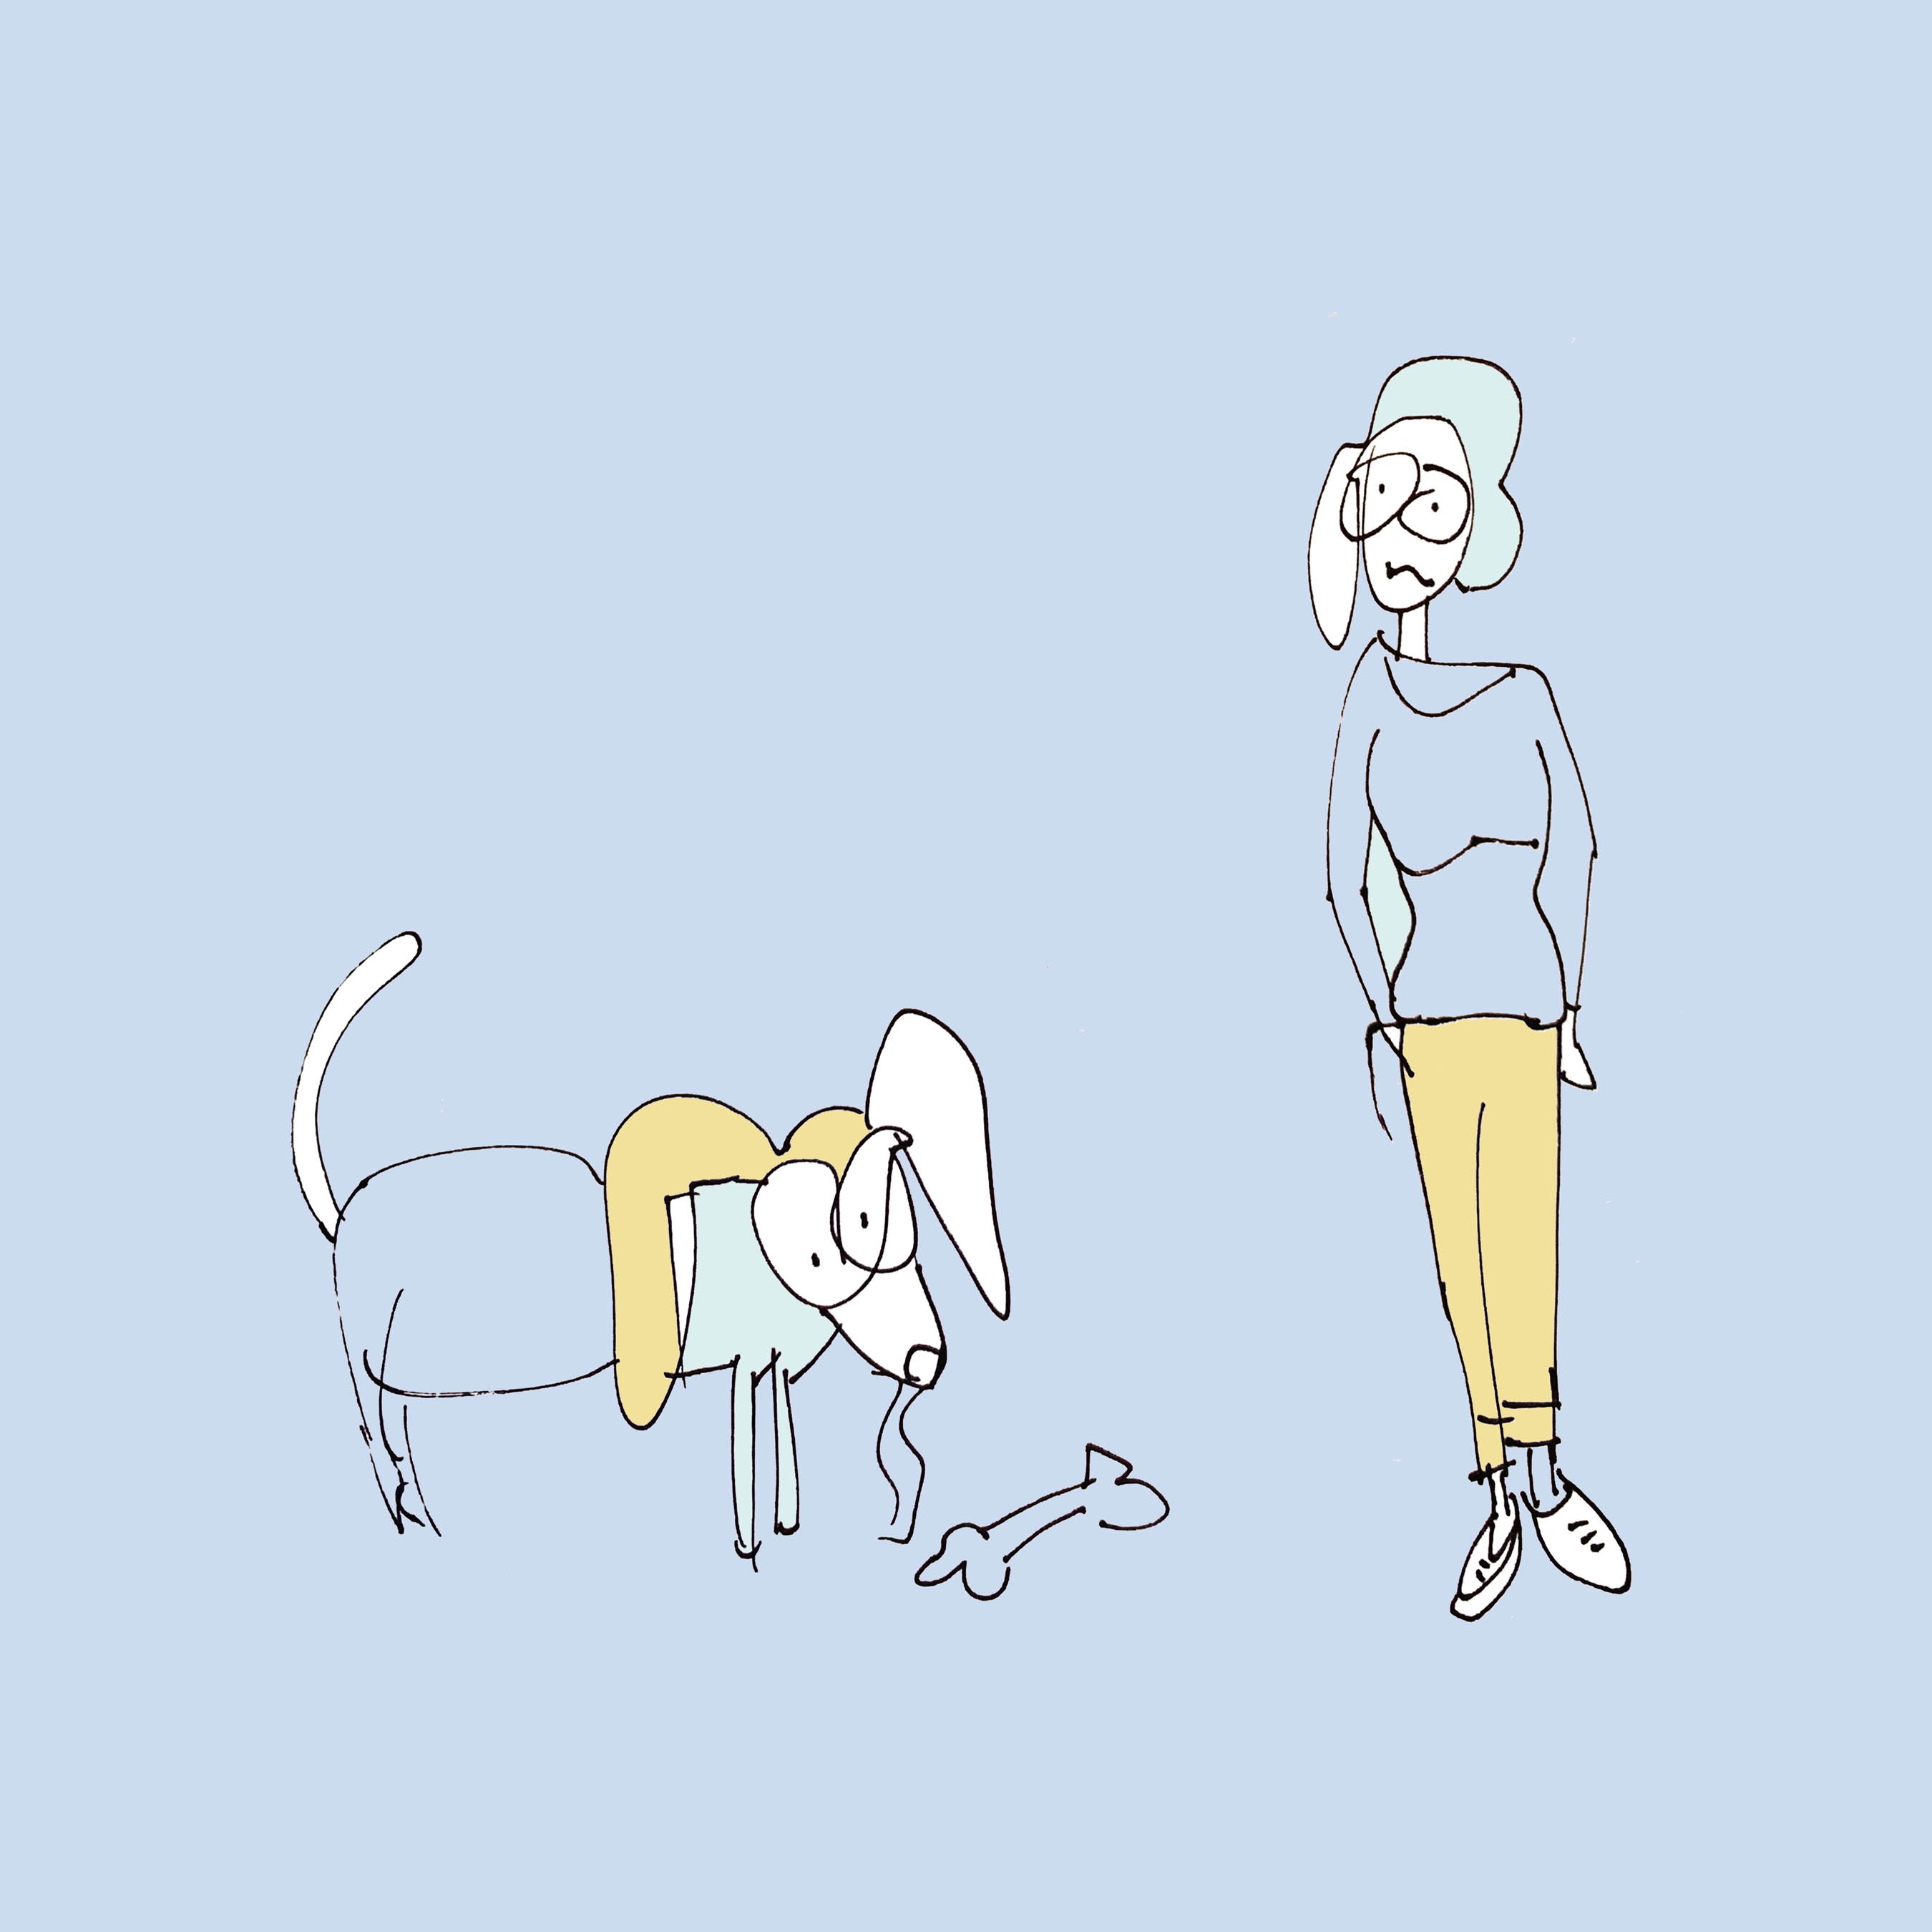 art every day number 619 the woman and her dog illustration drawing